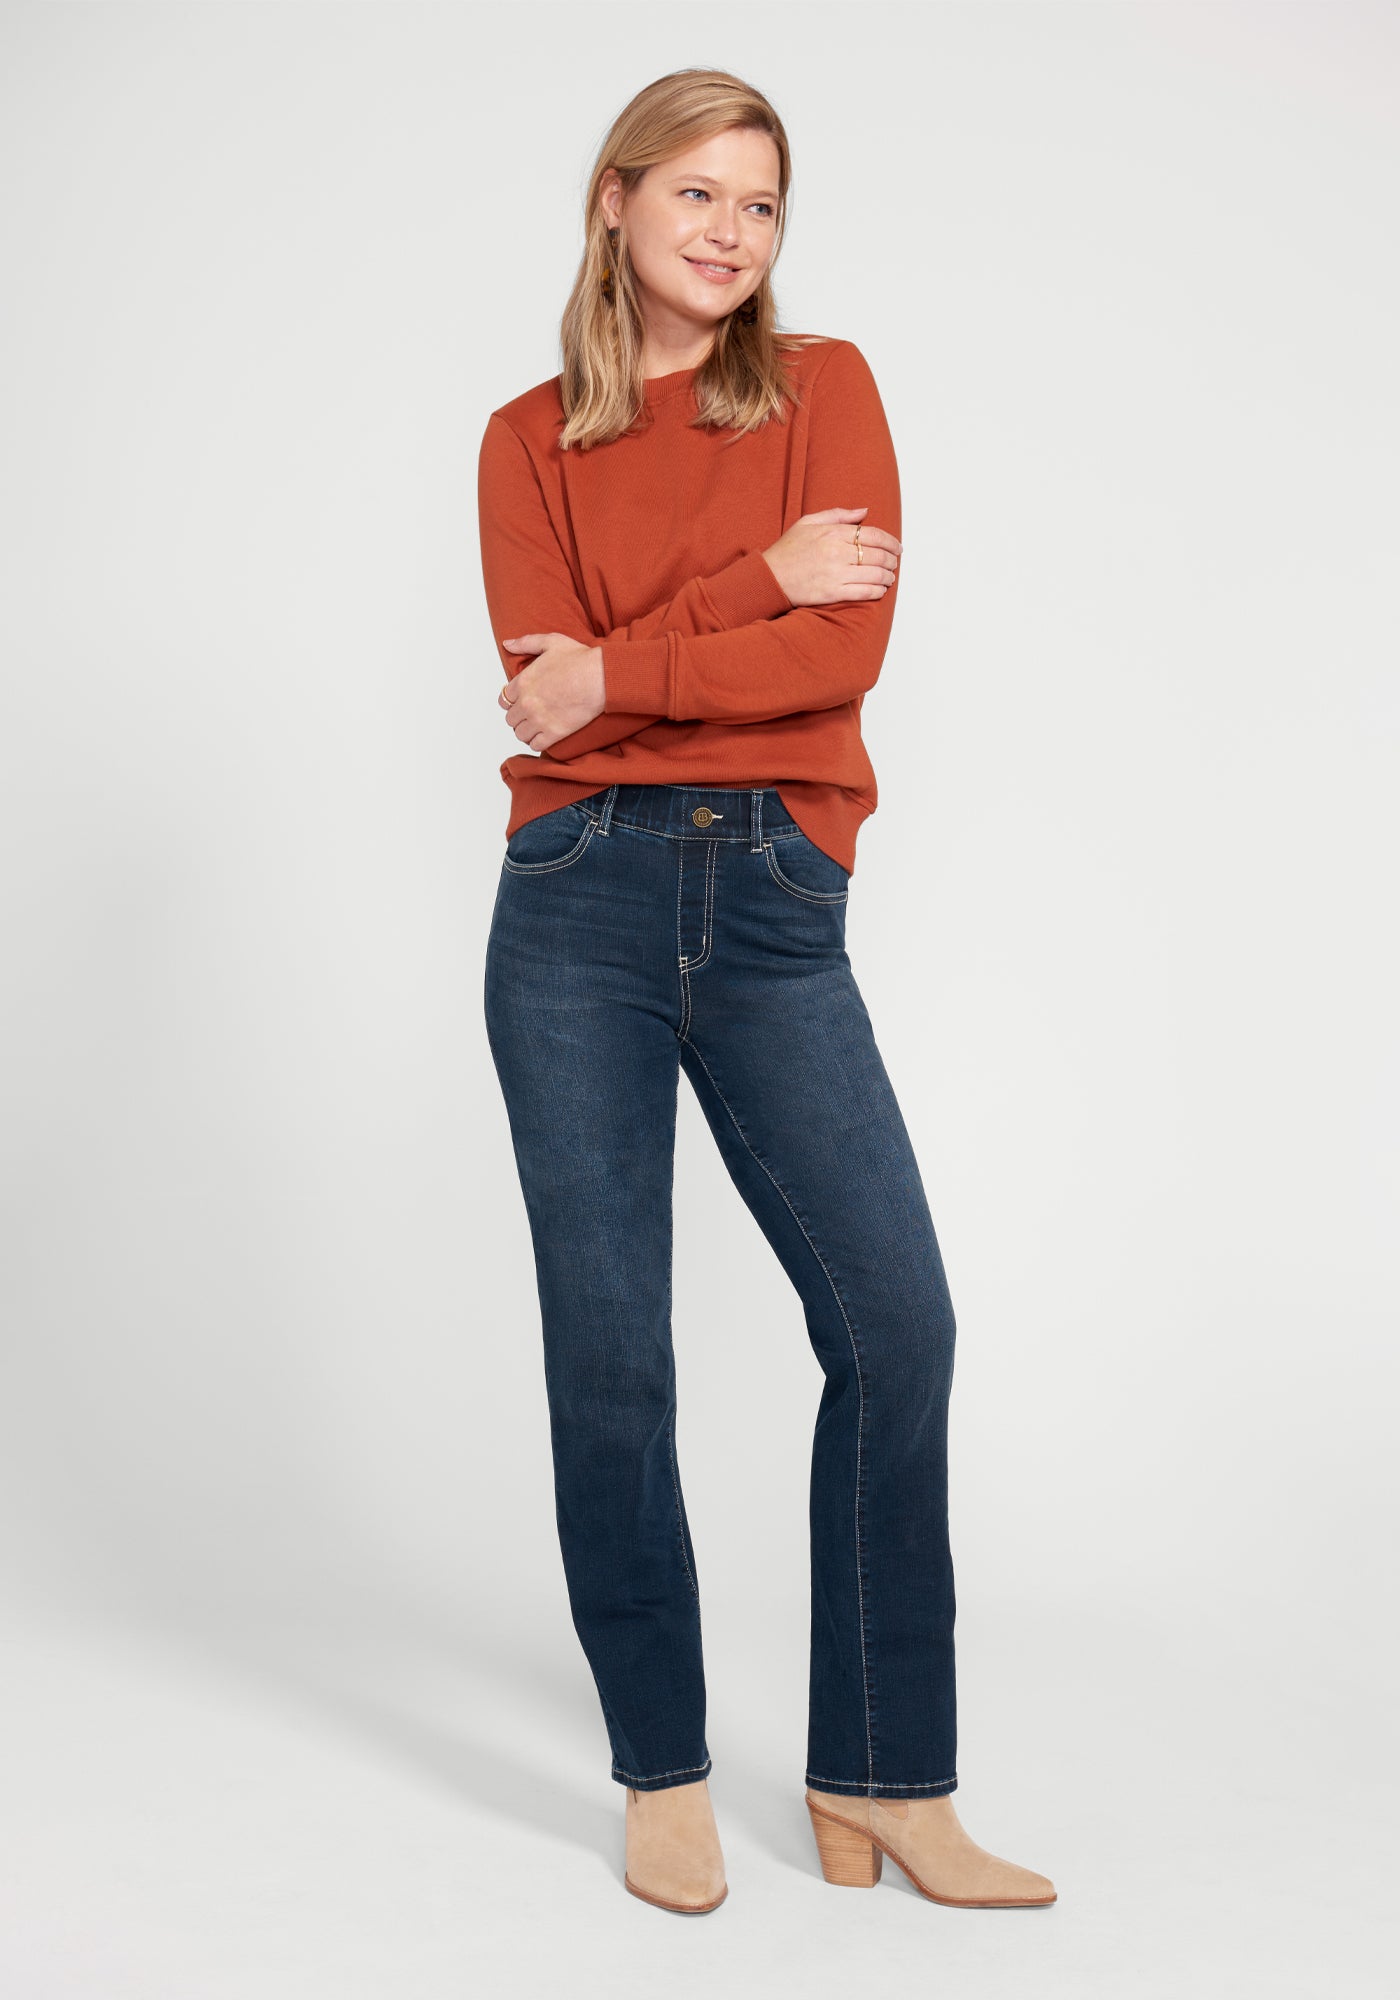 Betabrand Pull-On Boot Cut Jeans for Women